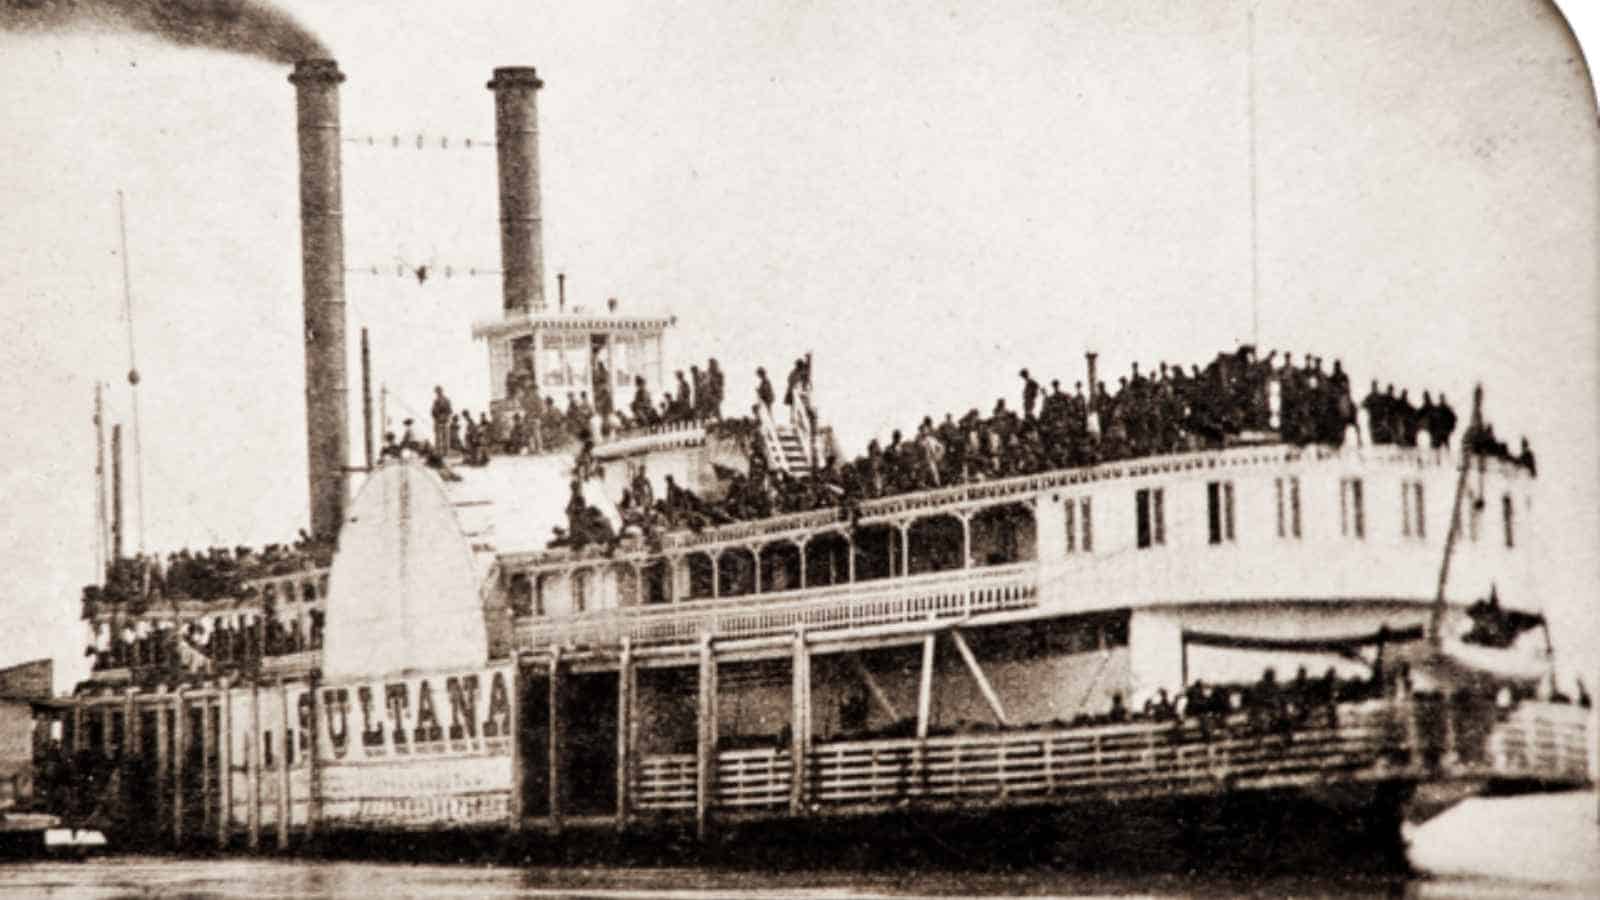 <p>During the final days of the American Civil War in 1865, the steamboat SS Sultana exploded on the Mississippi River, killing over 1,800 passengers and crew members. The ship was dangerously overcrowded with Union soldiers returning home from war.</p><p>The SS Sultana disaster was a result of <a href="https://eprints.qut.edu.au/9114/1/9114.pdf">greed and negligence</a>, as the ship’s owners were more concerned with profit than passenger safety. It also led to changes in government contracts for the transportation of soldiers.</p>